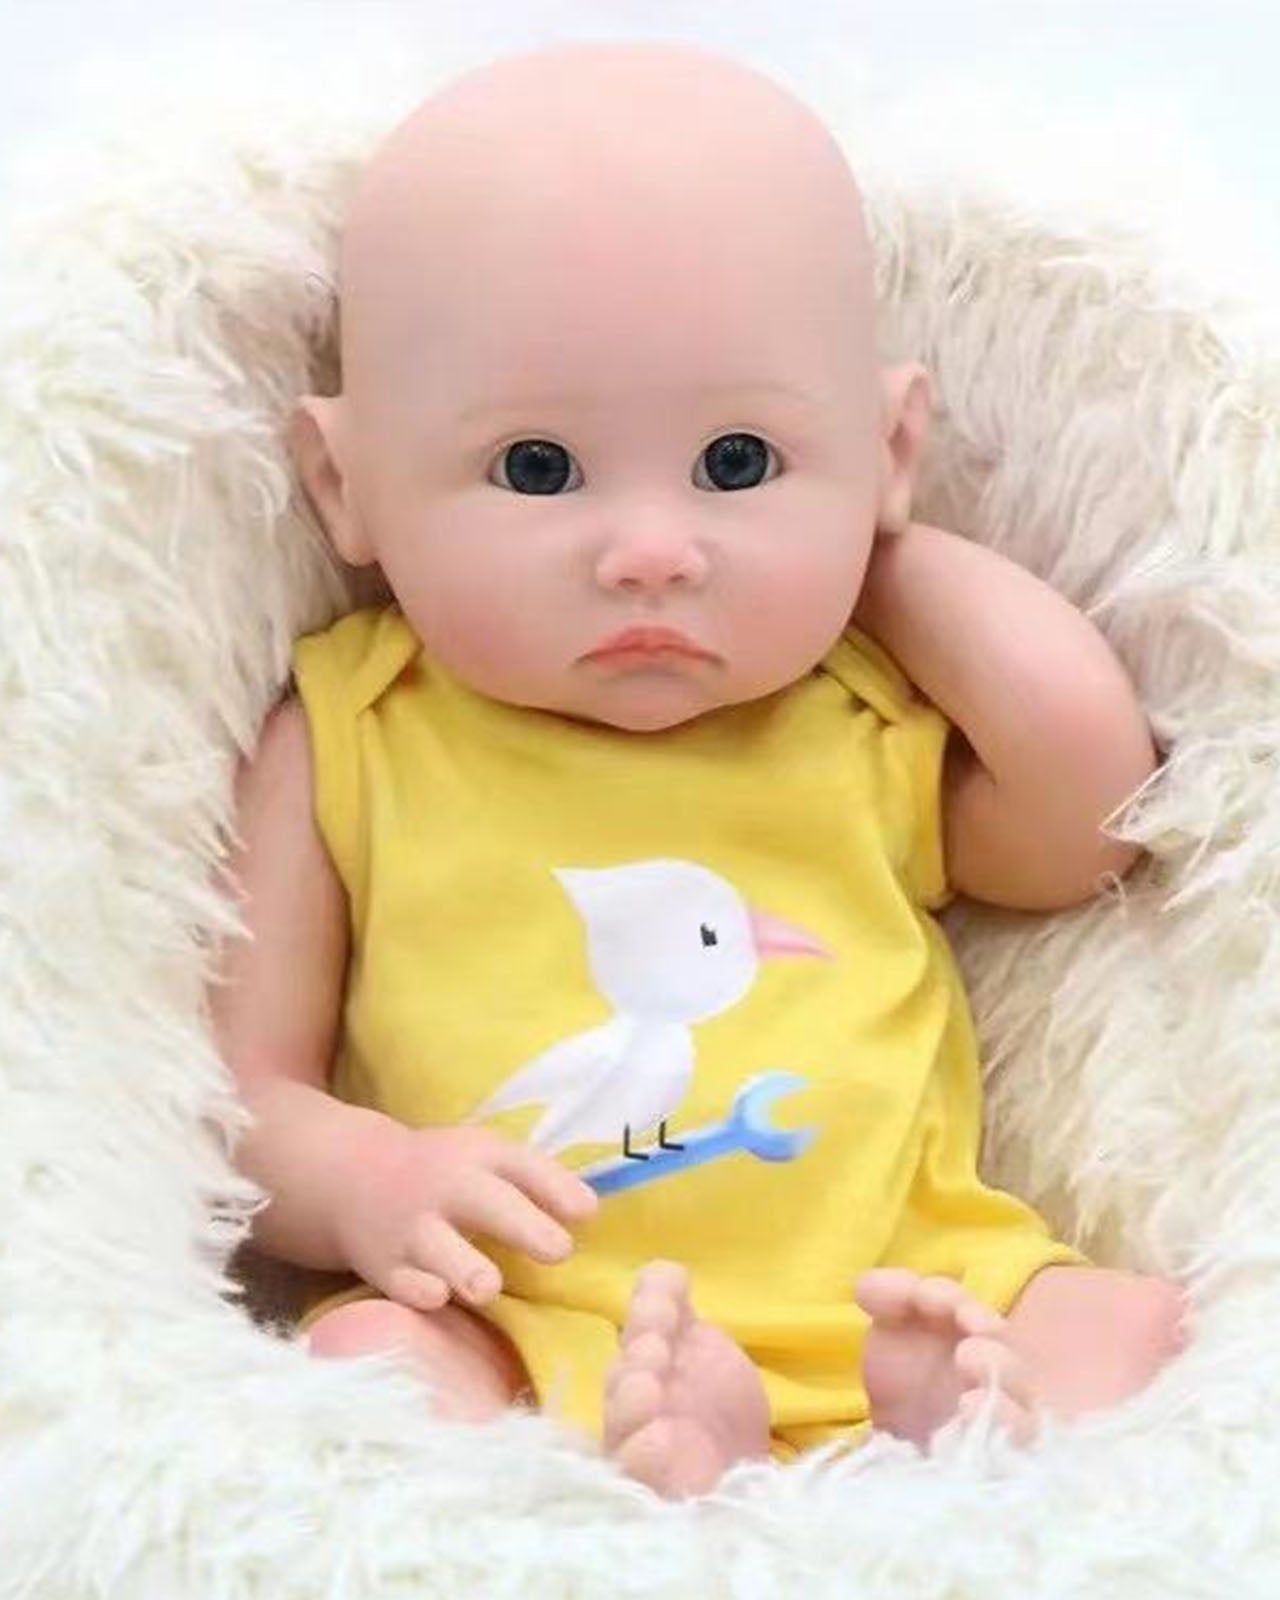 Mykel - 18" Full Silicone Reborn Baby Dolls Solid Platinum Liquid Newborn Twins with Extremely Flexible Body